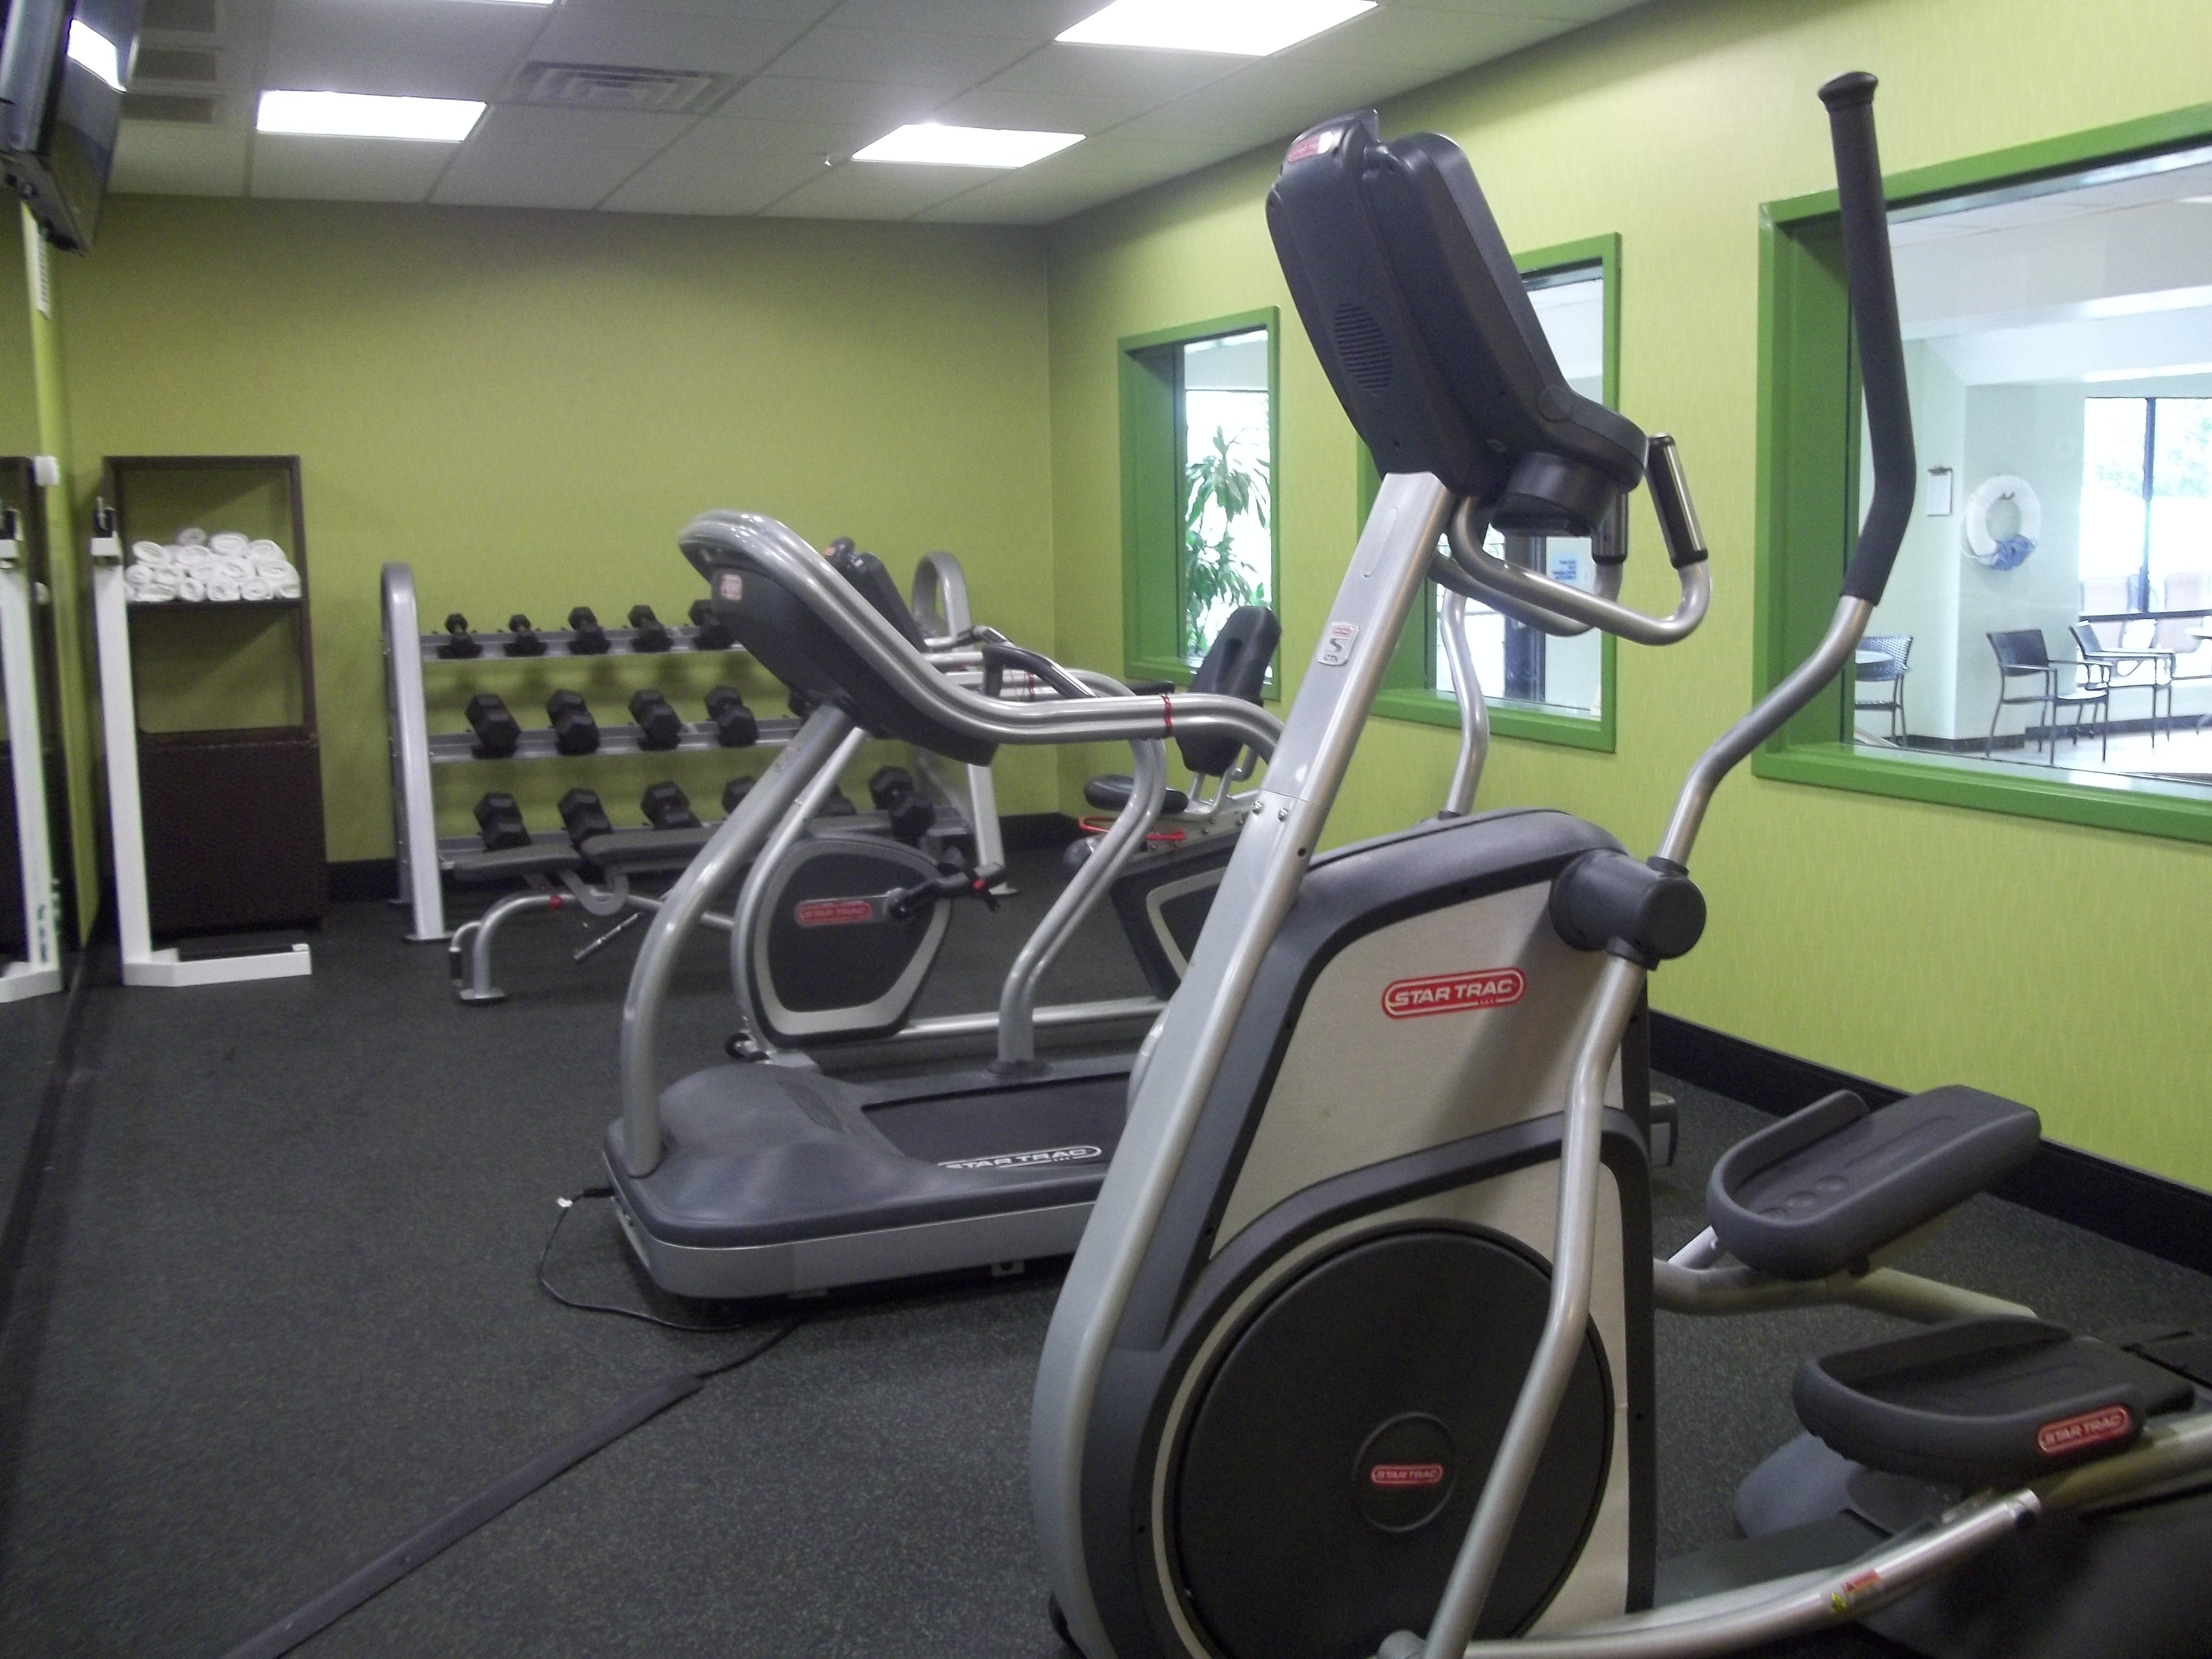 Work out in our fully equipped fitness center